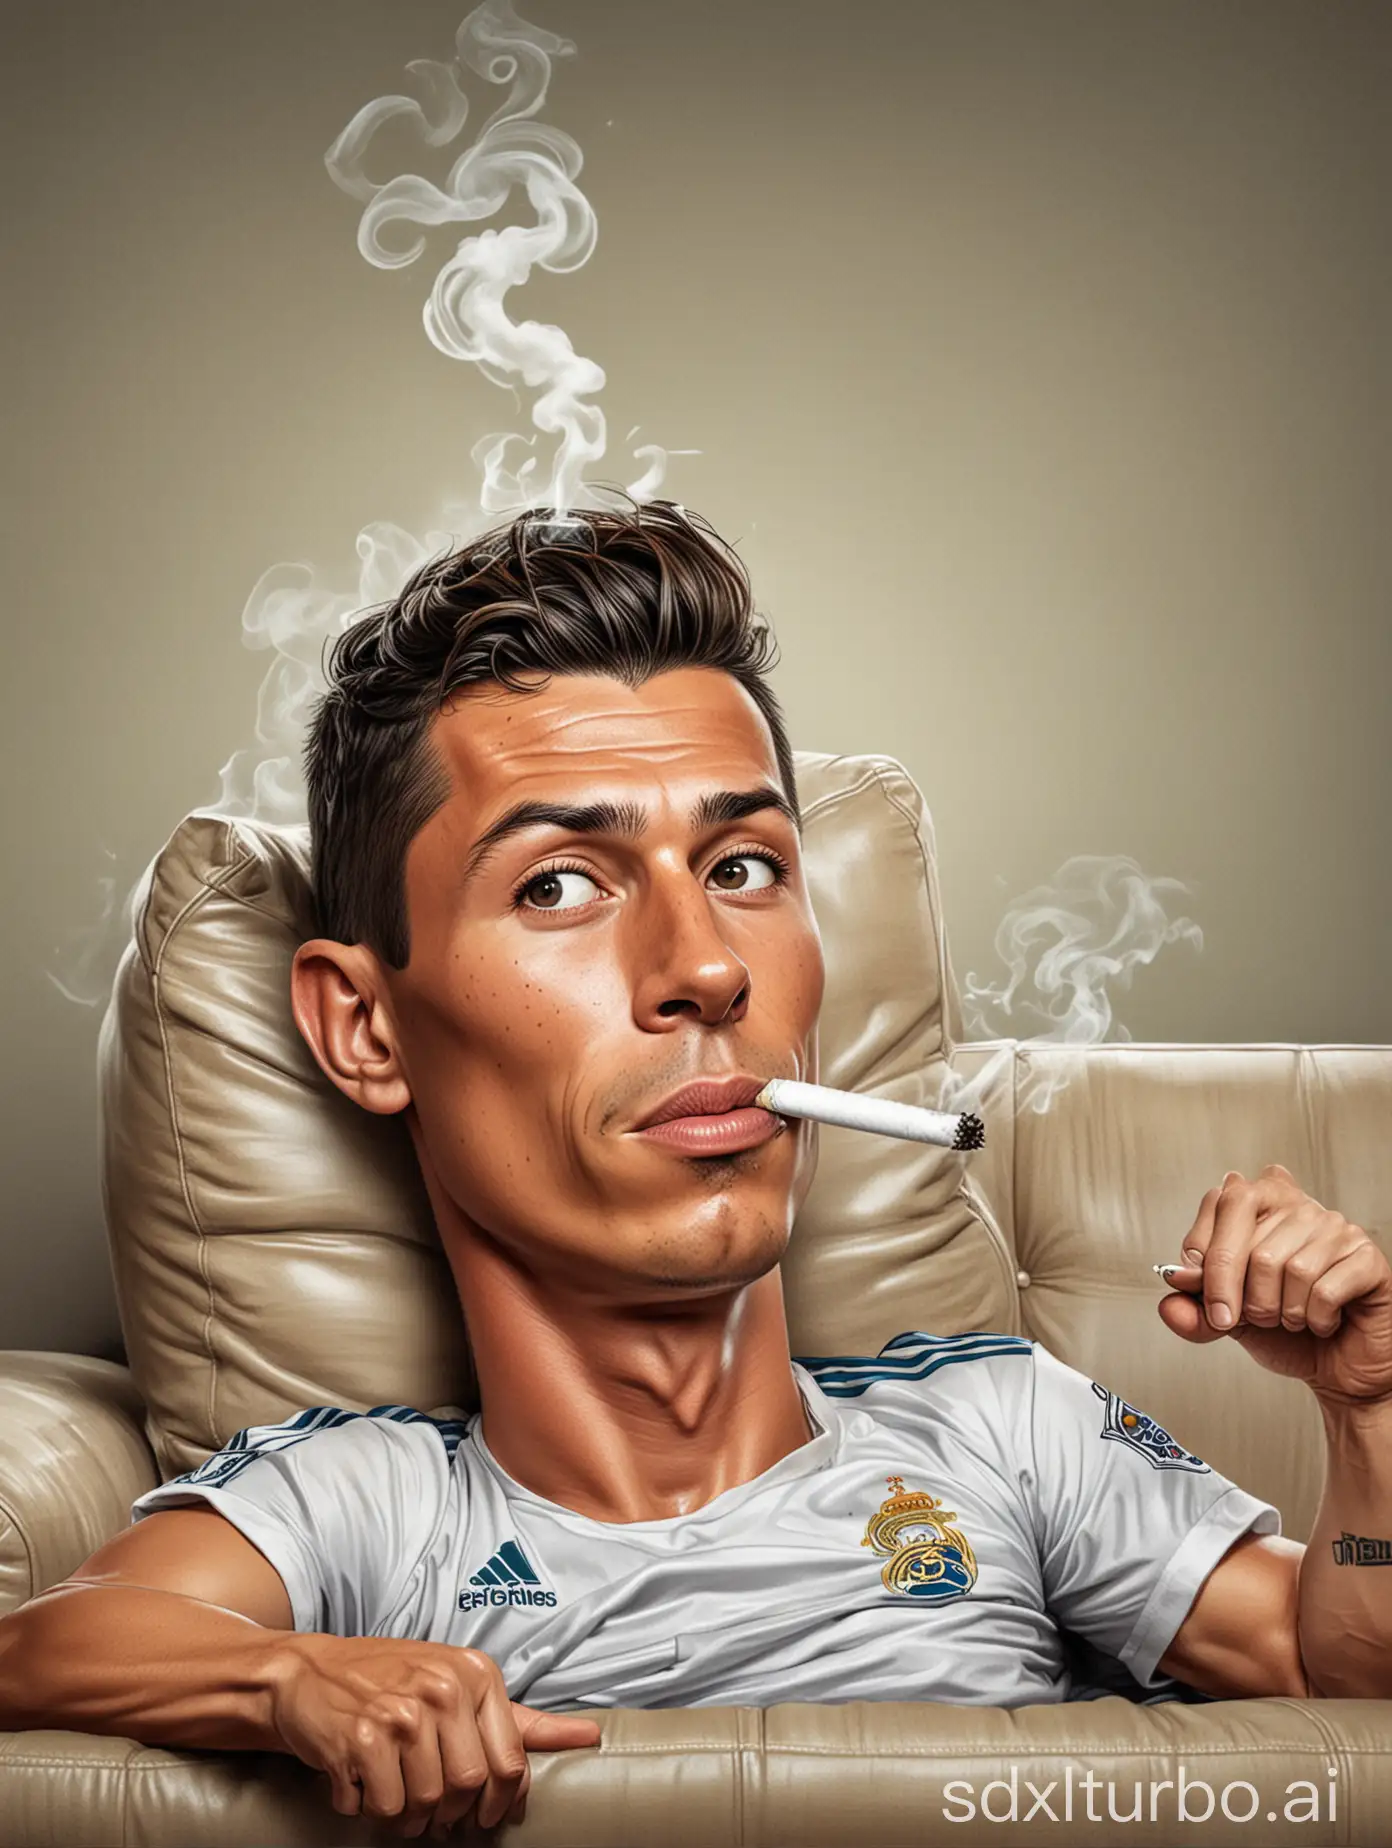 Caricature of Cristiano Ronaldo smokes while laying on couch